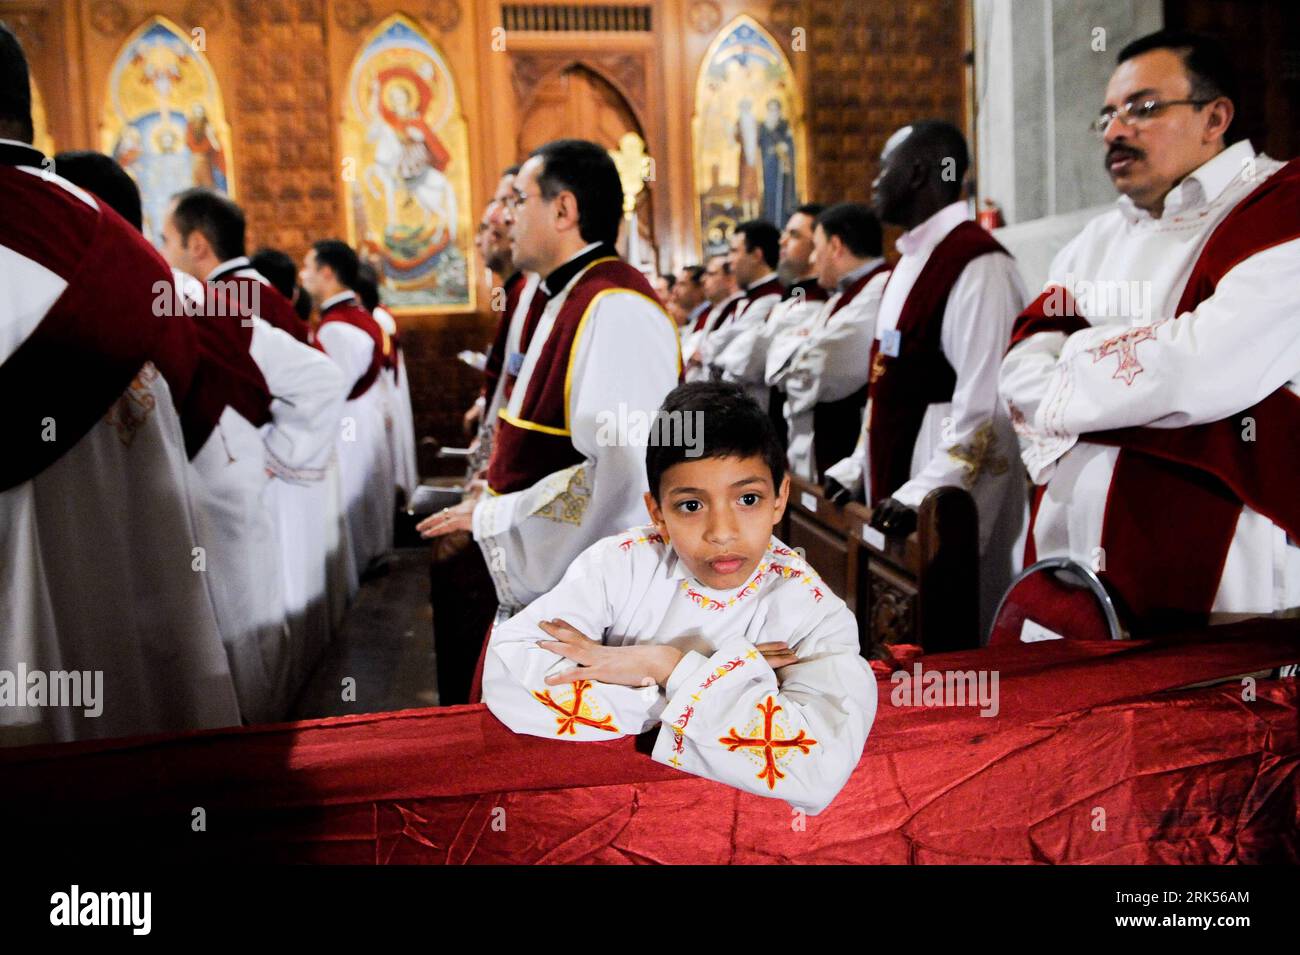 Bildnummer: 53709736  Datum: 06.01.2010  Copyright: imago/Xinhua (100107) -- CAIRO, Jan. 7, 2010 (Xinhua) -- A Coptic Egyptian boy sits beside the choir members,  to lead the mass of the Orthodox Christmas Eve on Jan. 6, 2010, in Saint Mark s Coptic Orthodox Cathedral in Cairo, capital of Egypt. led the mass on Wednesday, which was attended by thousands of Coptic Egyptians. (Xinhua/Zhang Ning) (lmz) (3)EGYPT-CAIRO-ORTHODOX CHRISTMAS PUBLICATIONxNOTxINxCHN Gesellschaft Ägypten Religion Christentum kbdig xcb 2010 quer premiumd o0 koptisch, koptische, Christen    Bildnummer 53709736 Date 06 01 20 Stock Photo